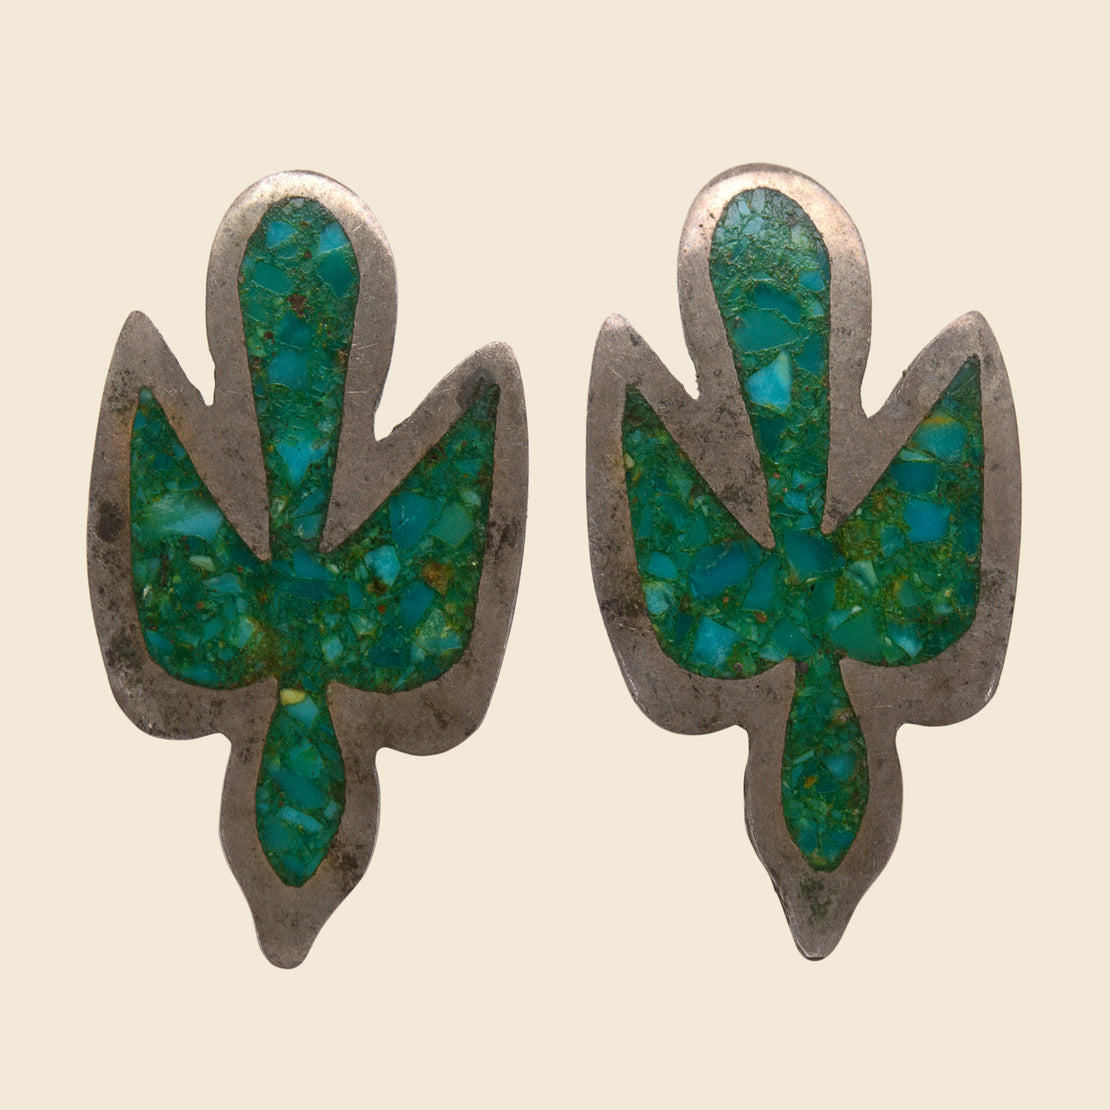 Vintage Bird Earrings - Silver & Composite Turquoise